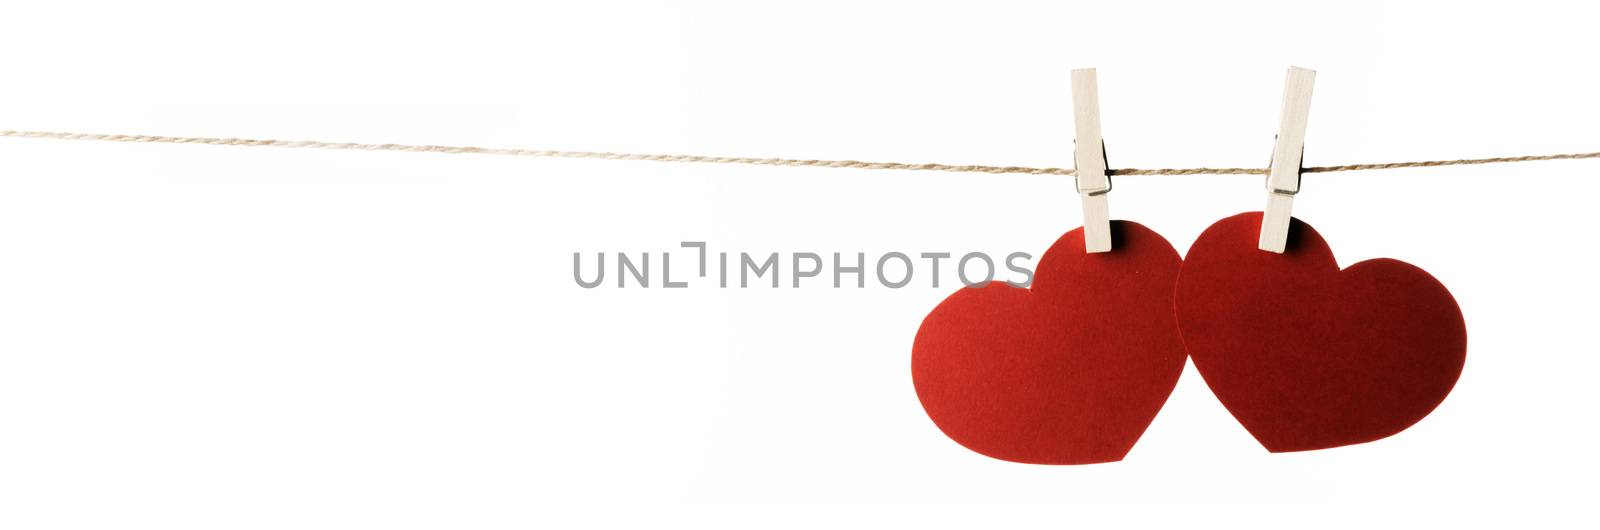 Clothes pegs and two red paper hearts on rope isolated on white background Valentines day concept